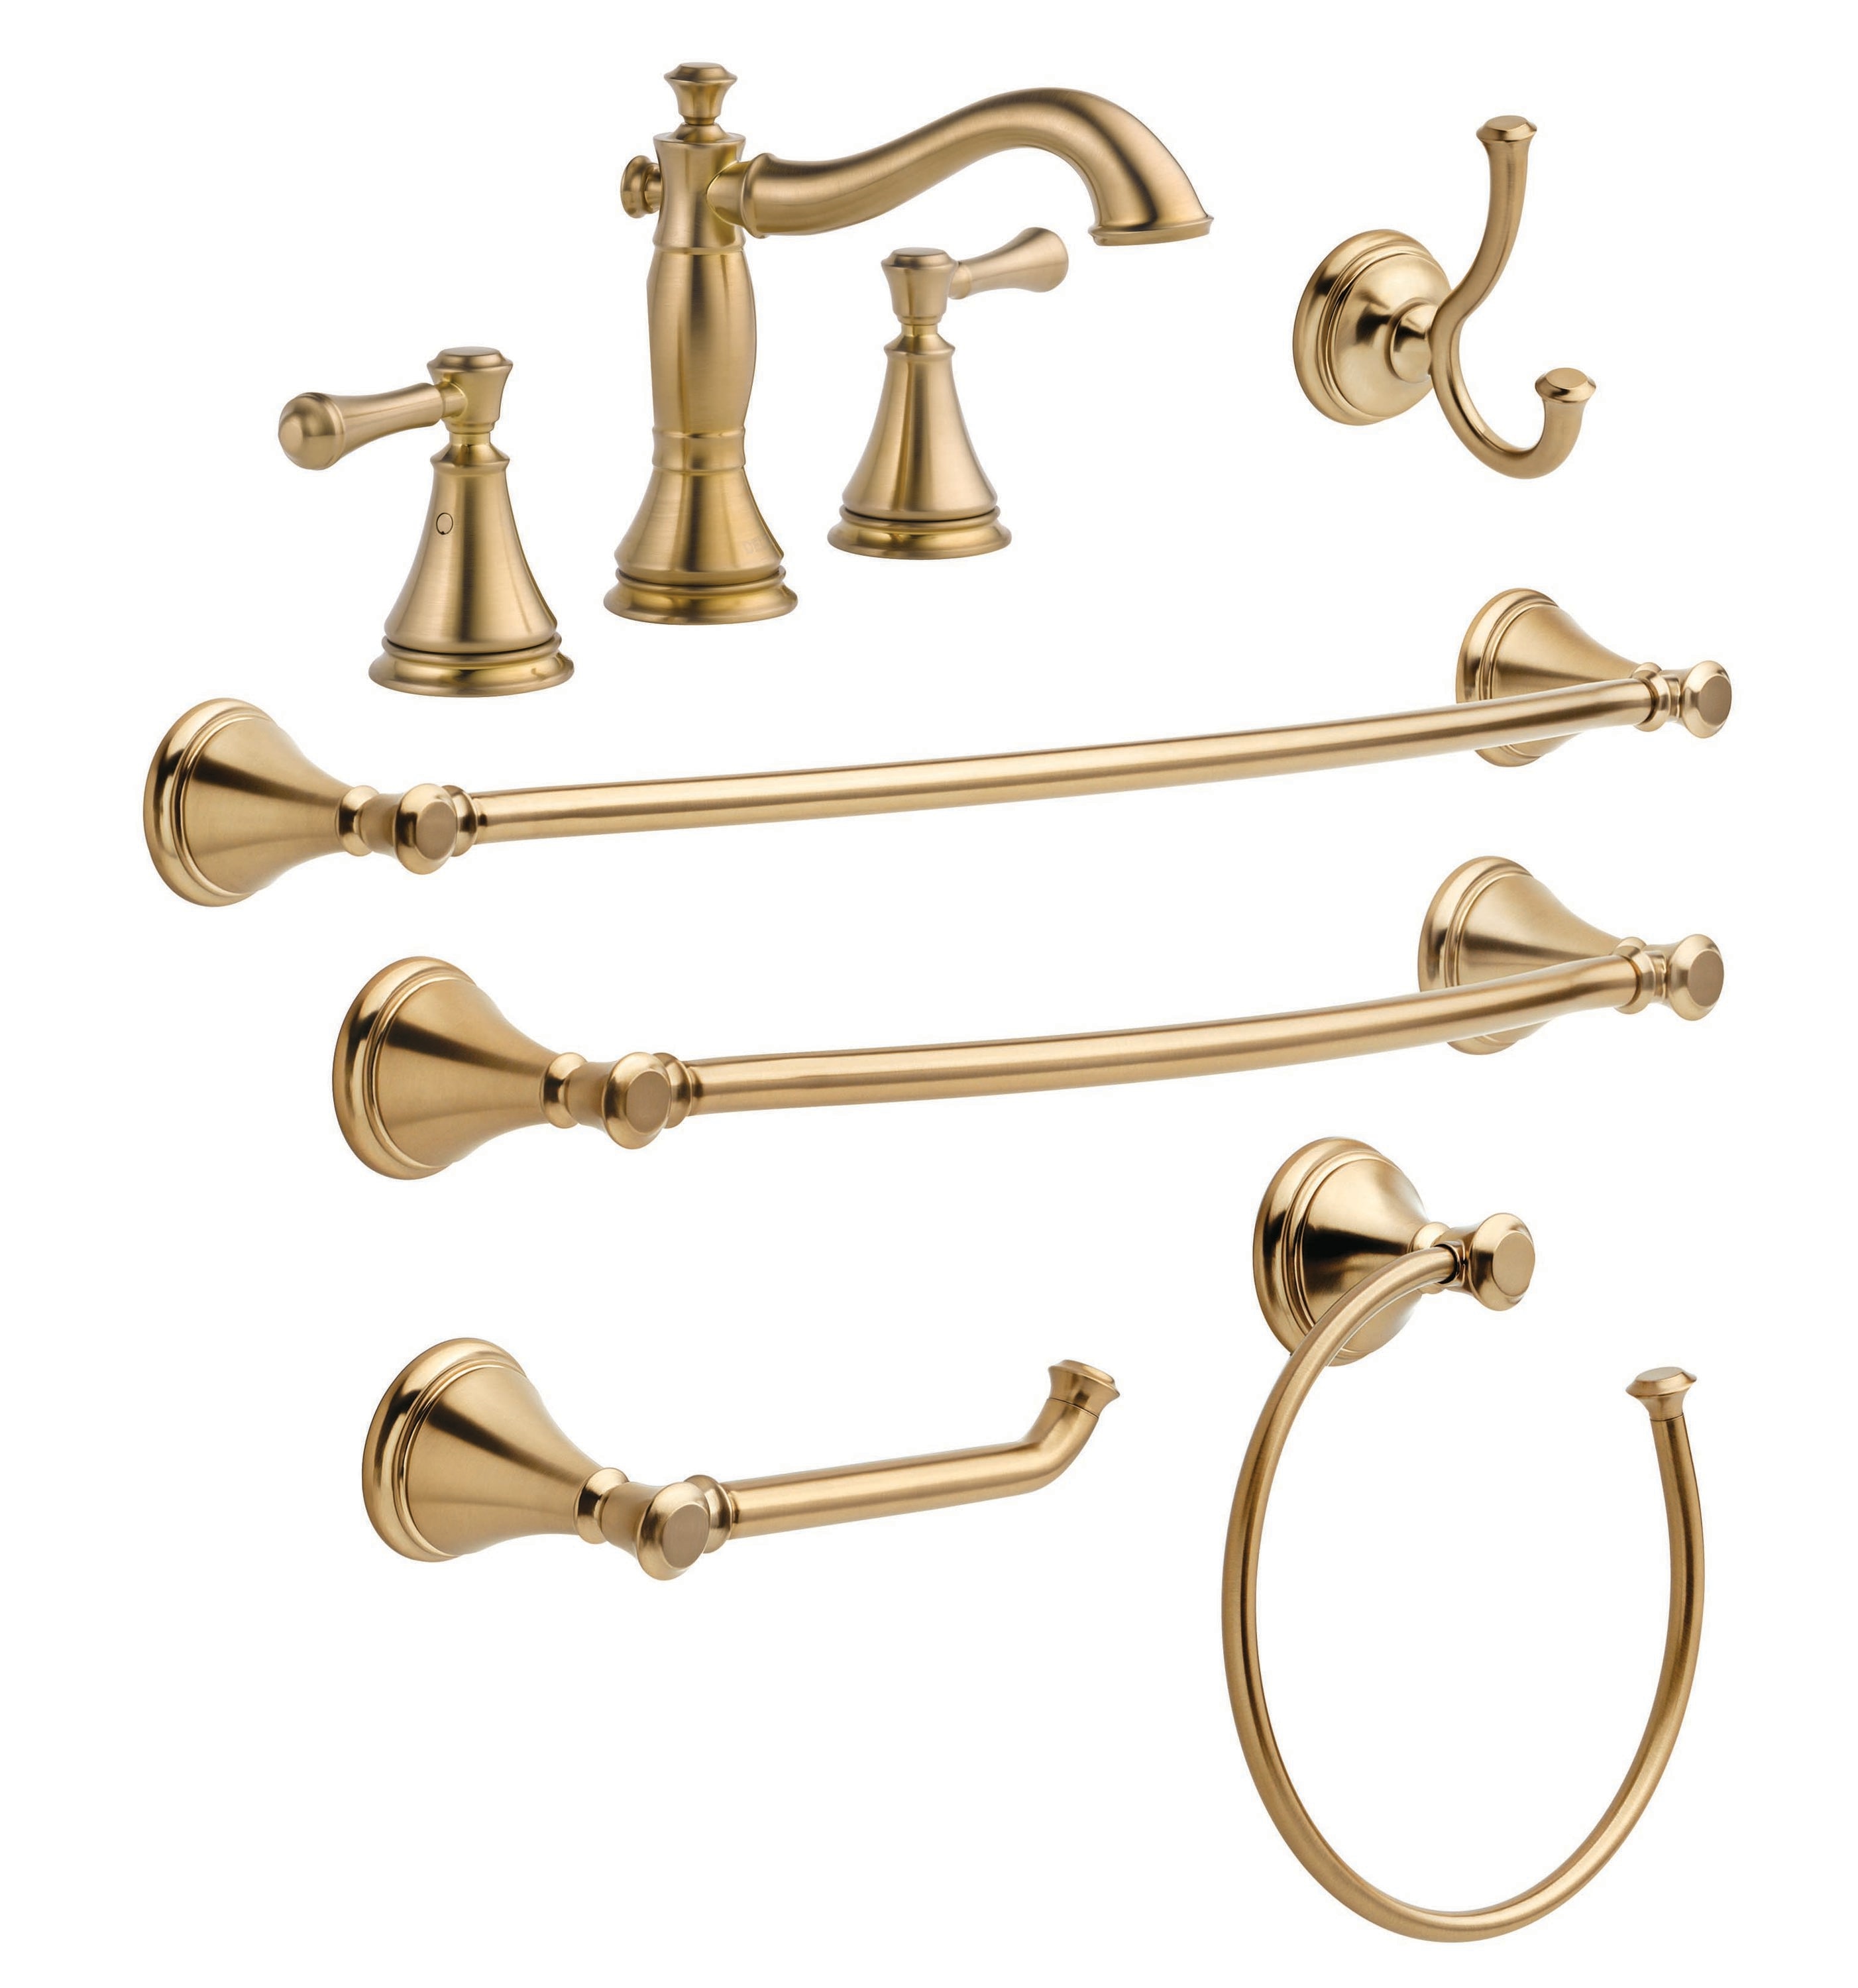 Cassidy Delta Faucet - Champagne Bronze Finish #kitchendesign